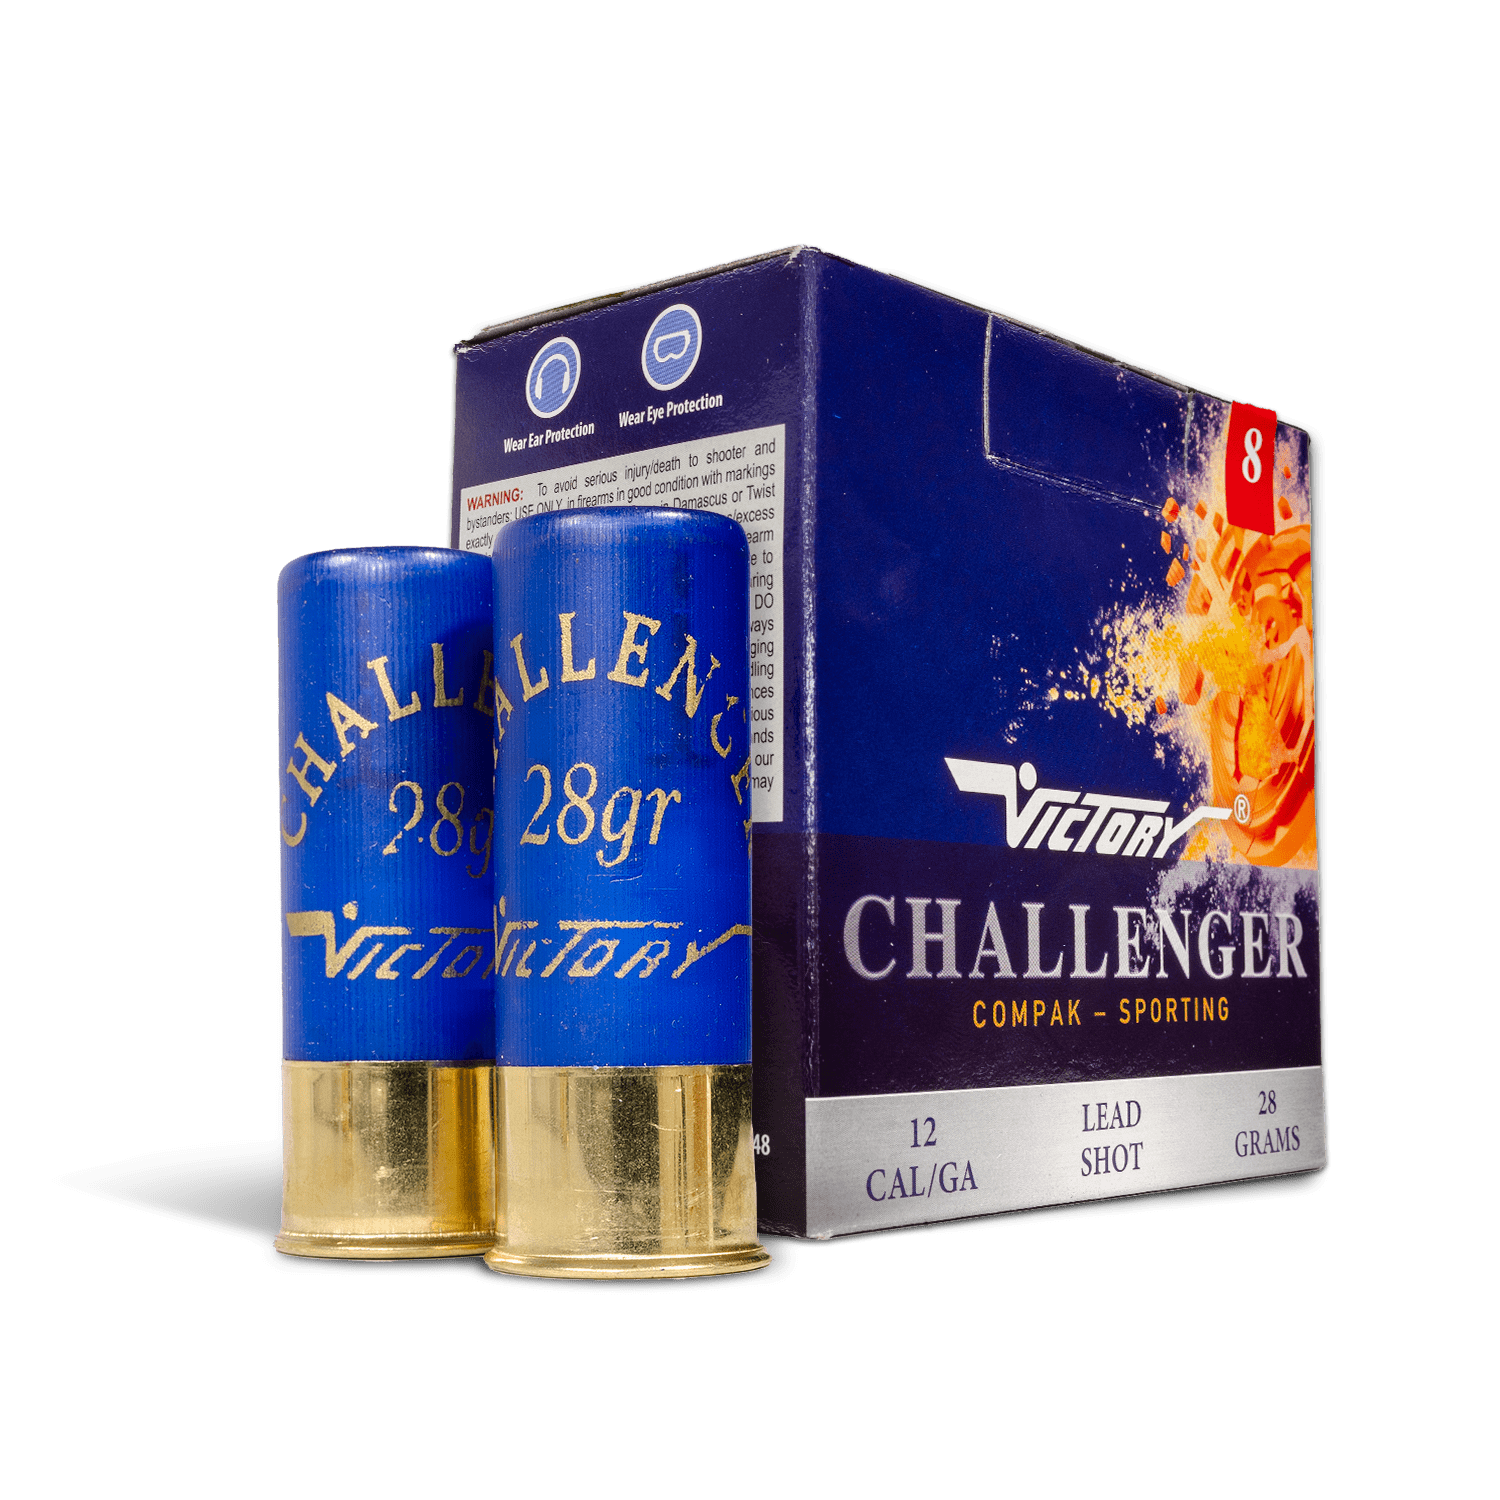 Victory Challenger shotgun cartridges available for delivery